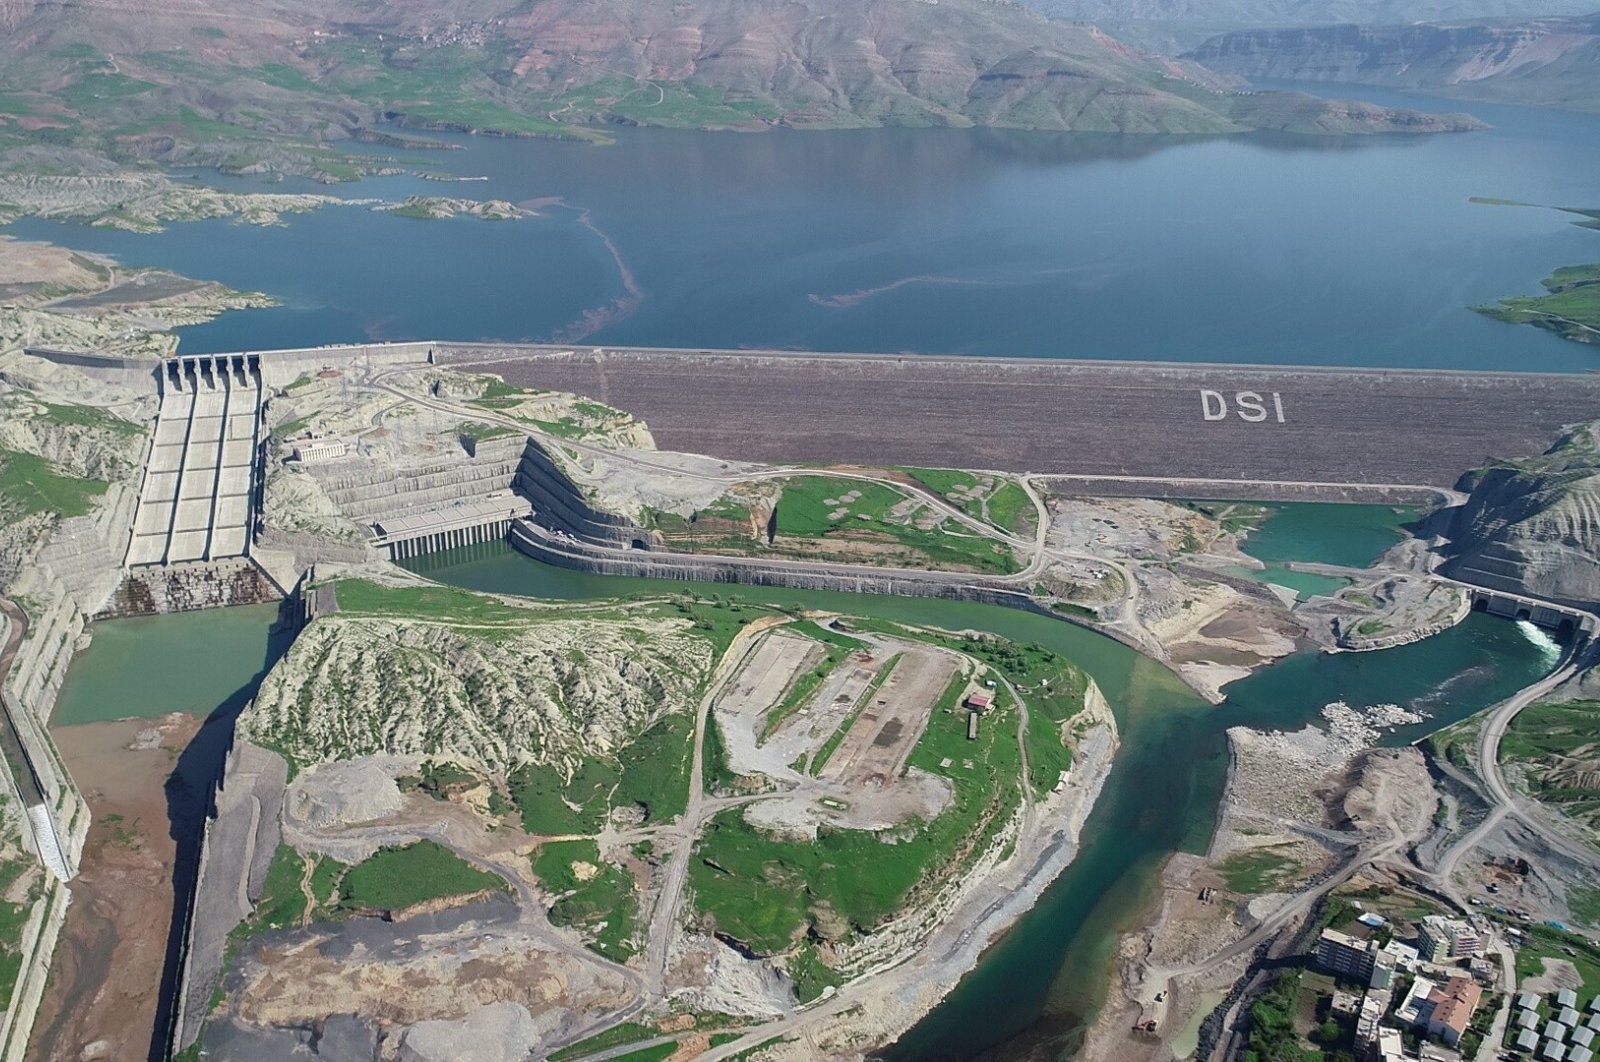 A general view of Ilısu Dam, located on the Tigris River in southern Turkey, May 9, 2020. (IHA Photo)